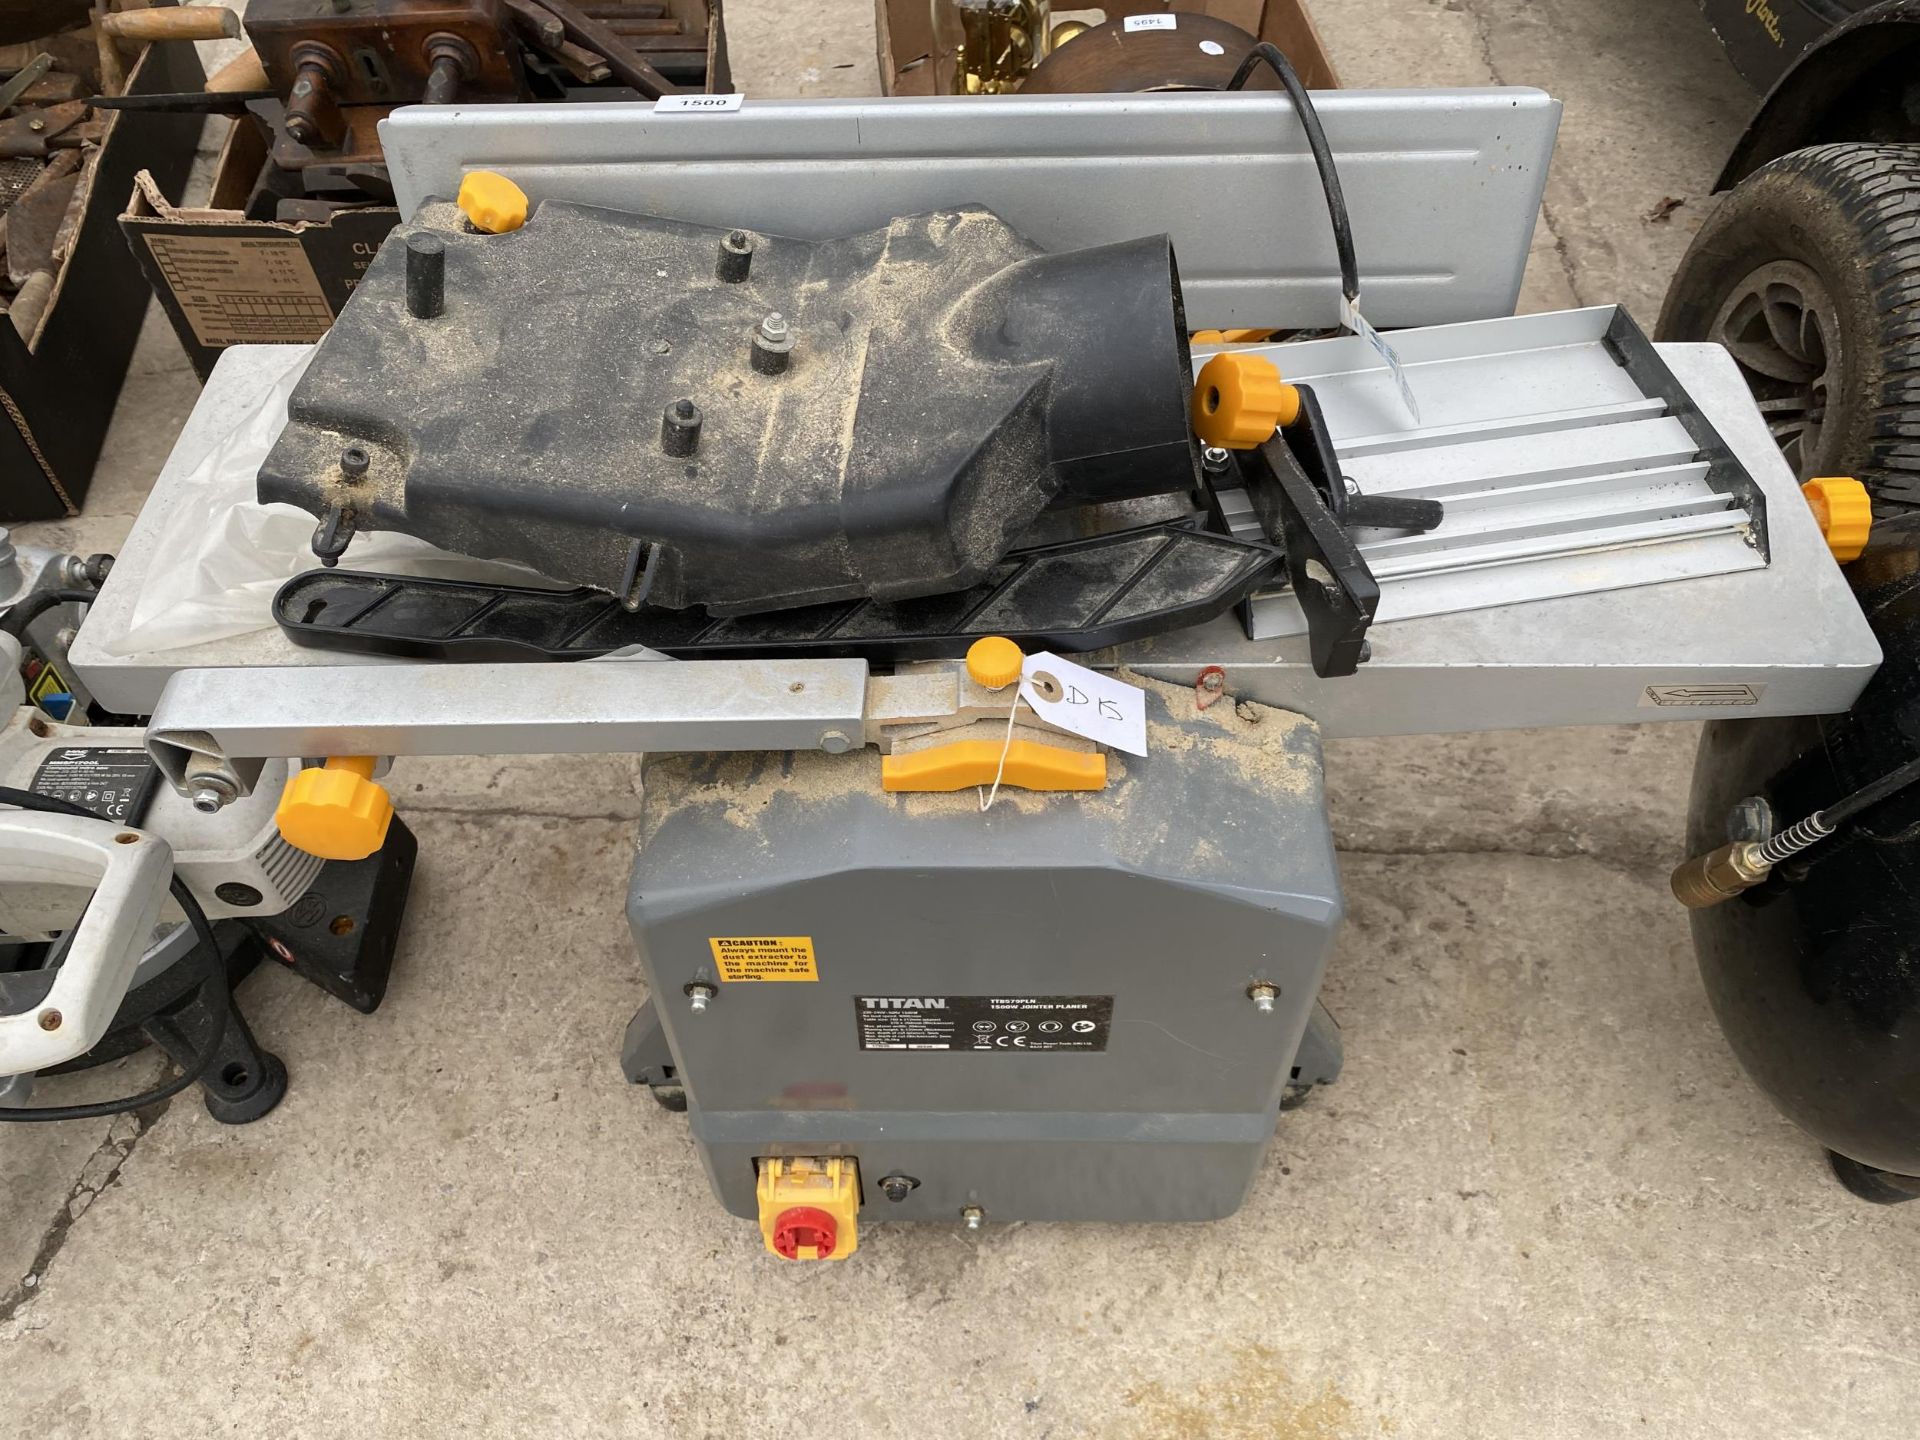 A TITAN JOINTER PLANER BELIEVED IN WORKING ORDER BUT NO WARRANTY